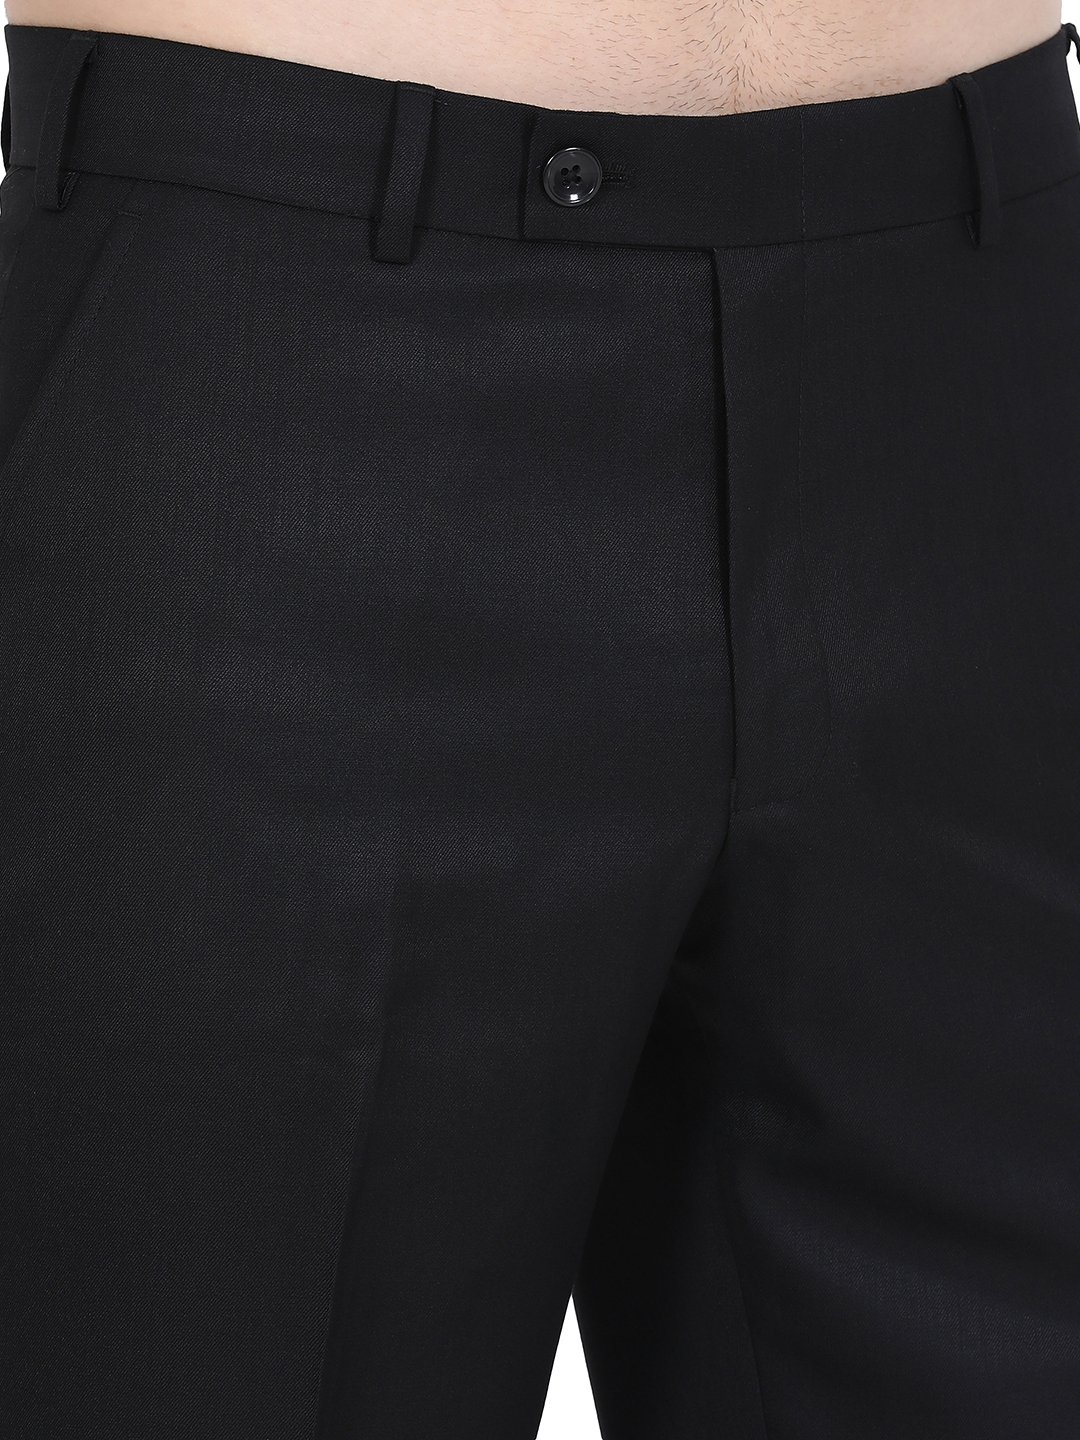 Black Solid Classic fit Formal Trouser | Greenfibre